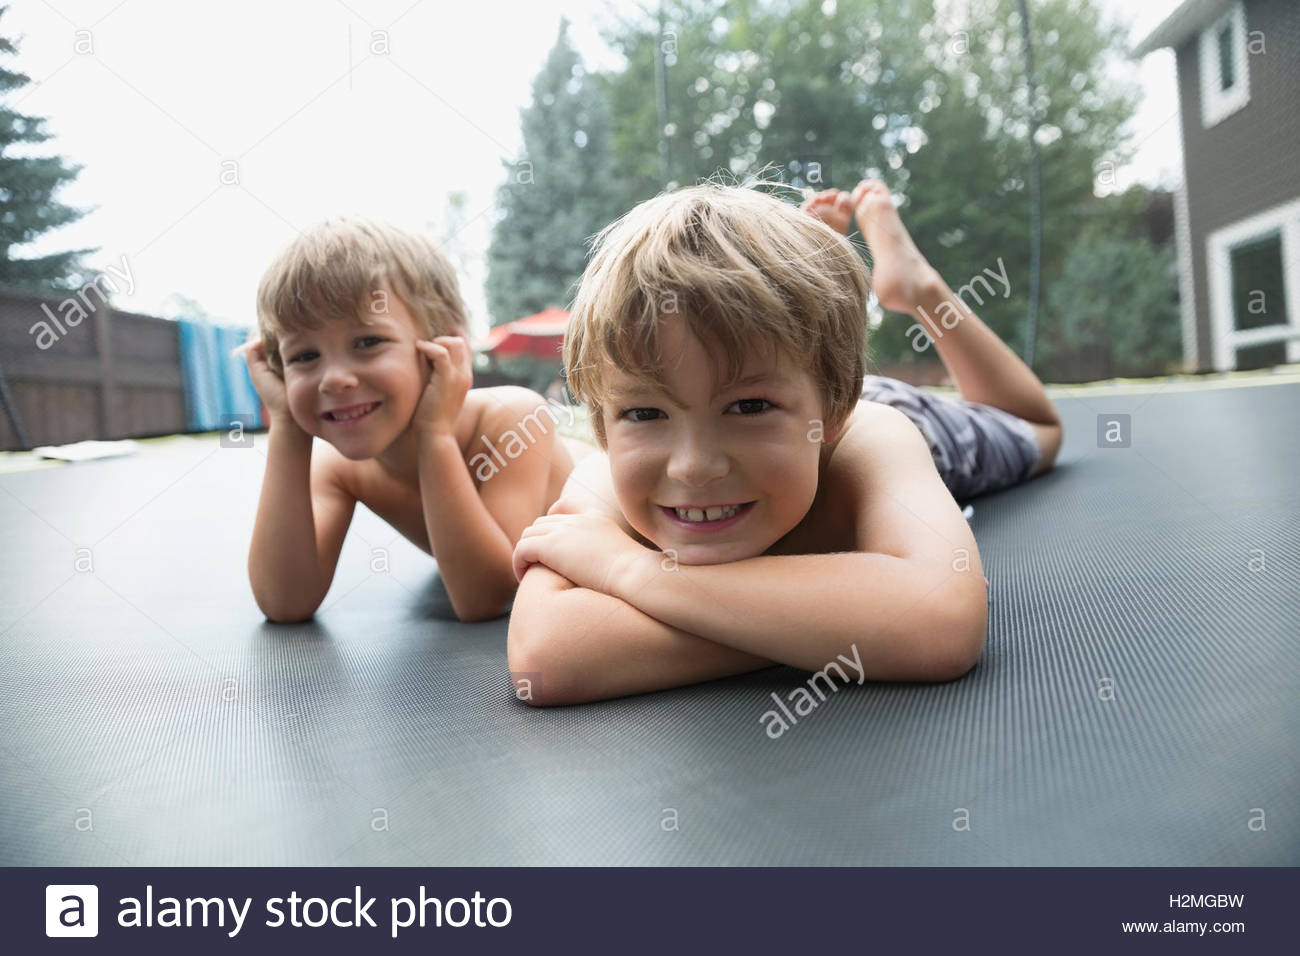 Portrait Smiling Boys Laying On Trampoline In Backyard Stock Photo